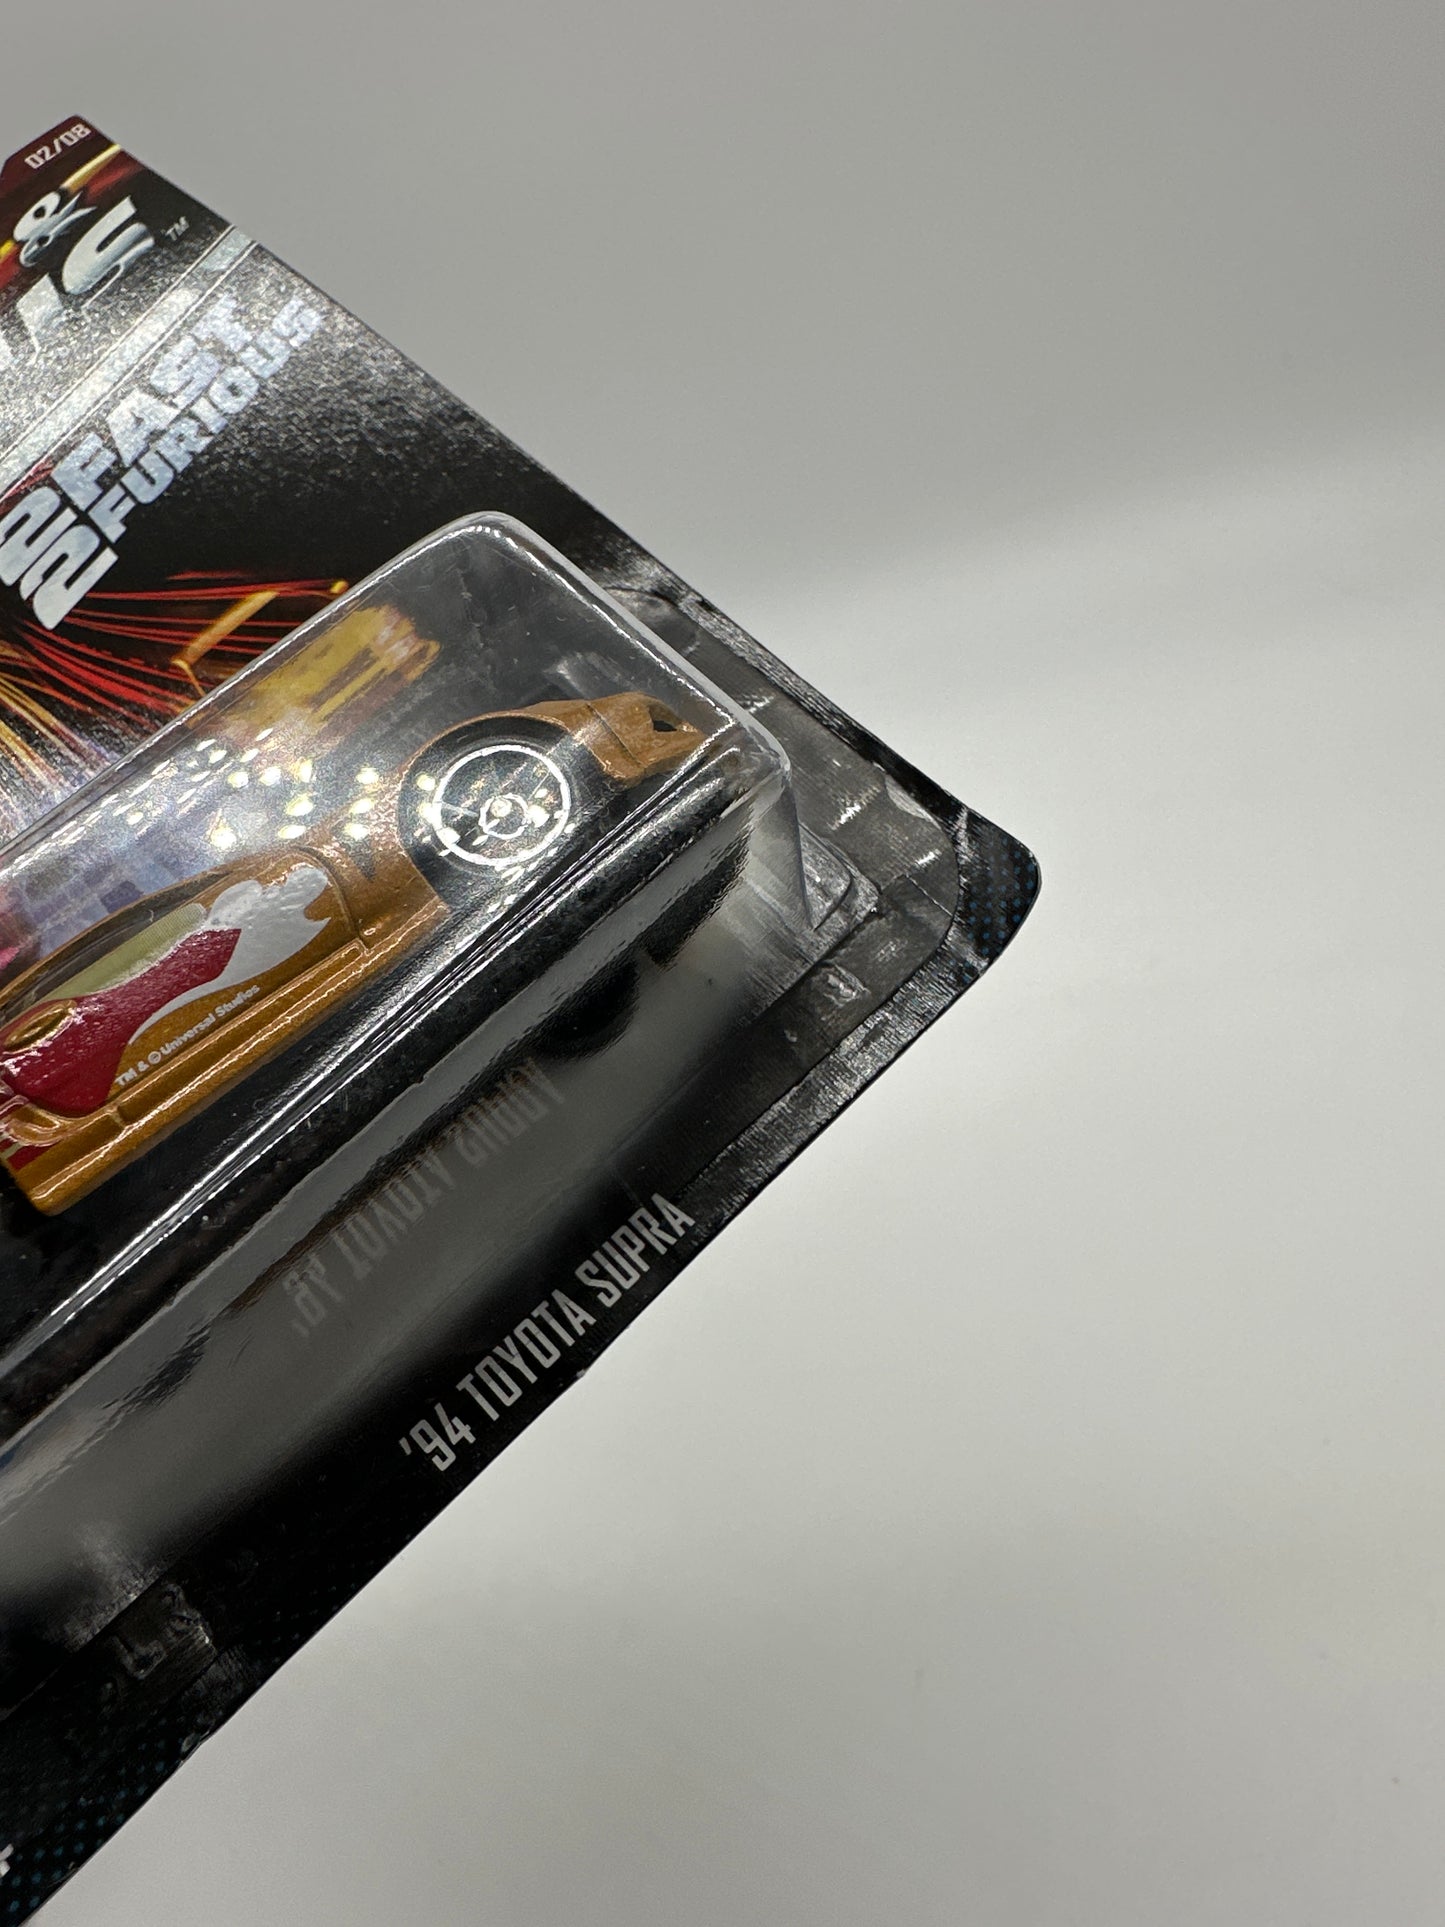 Hot Wheels - Walmart Exclusive - 2015 Fast & Furious Mainline Series Complete Set of 8